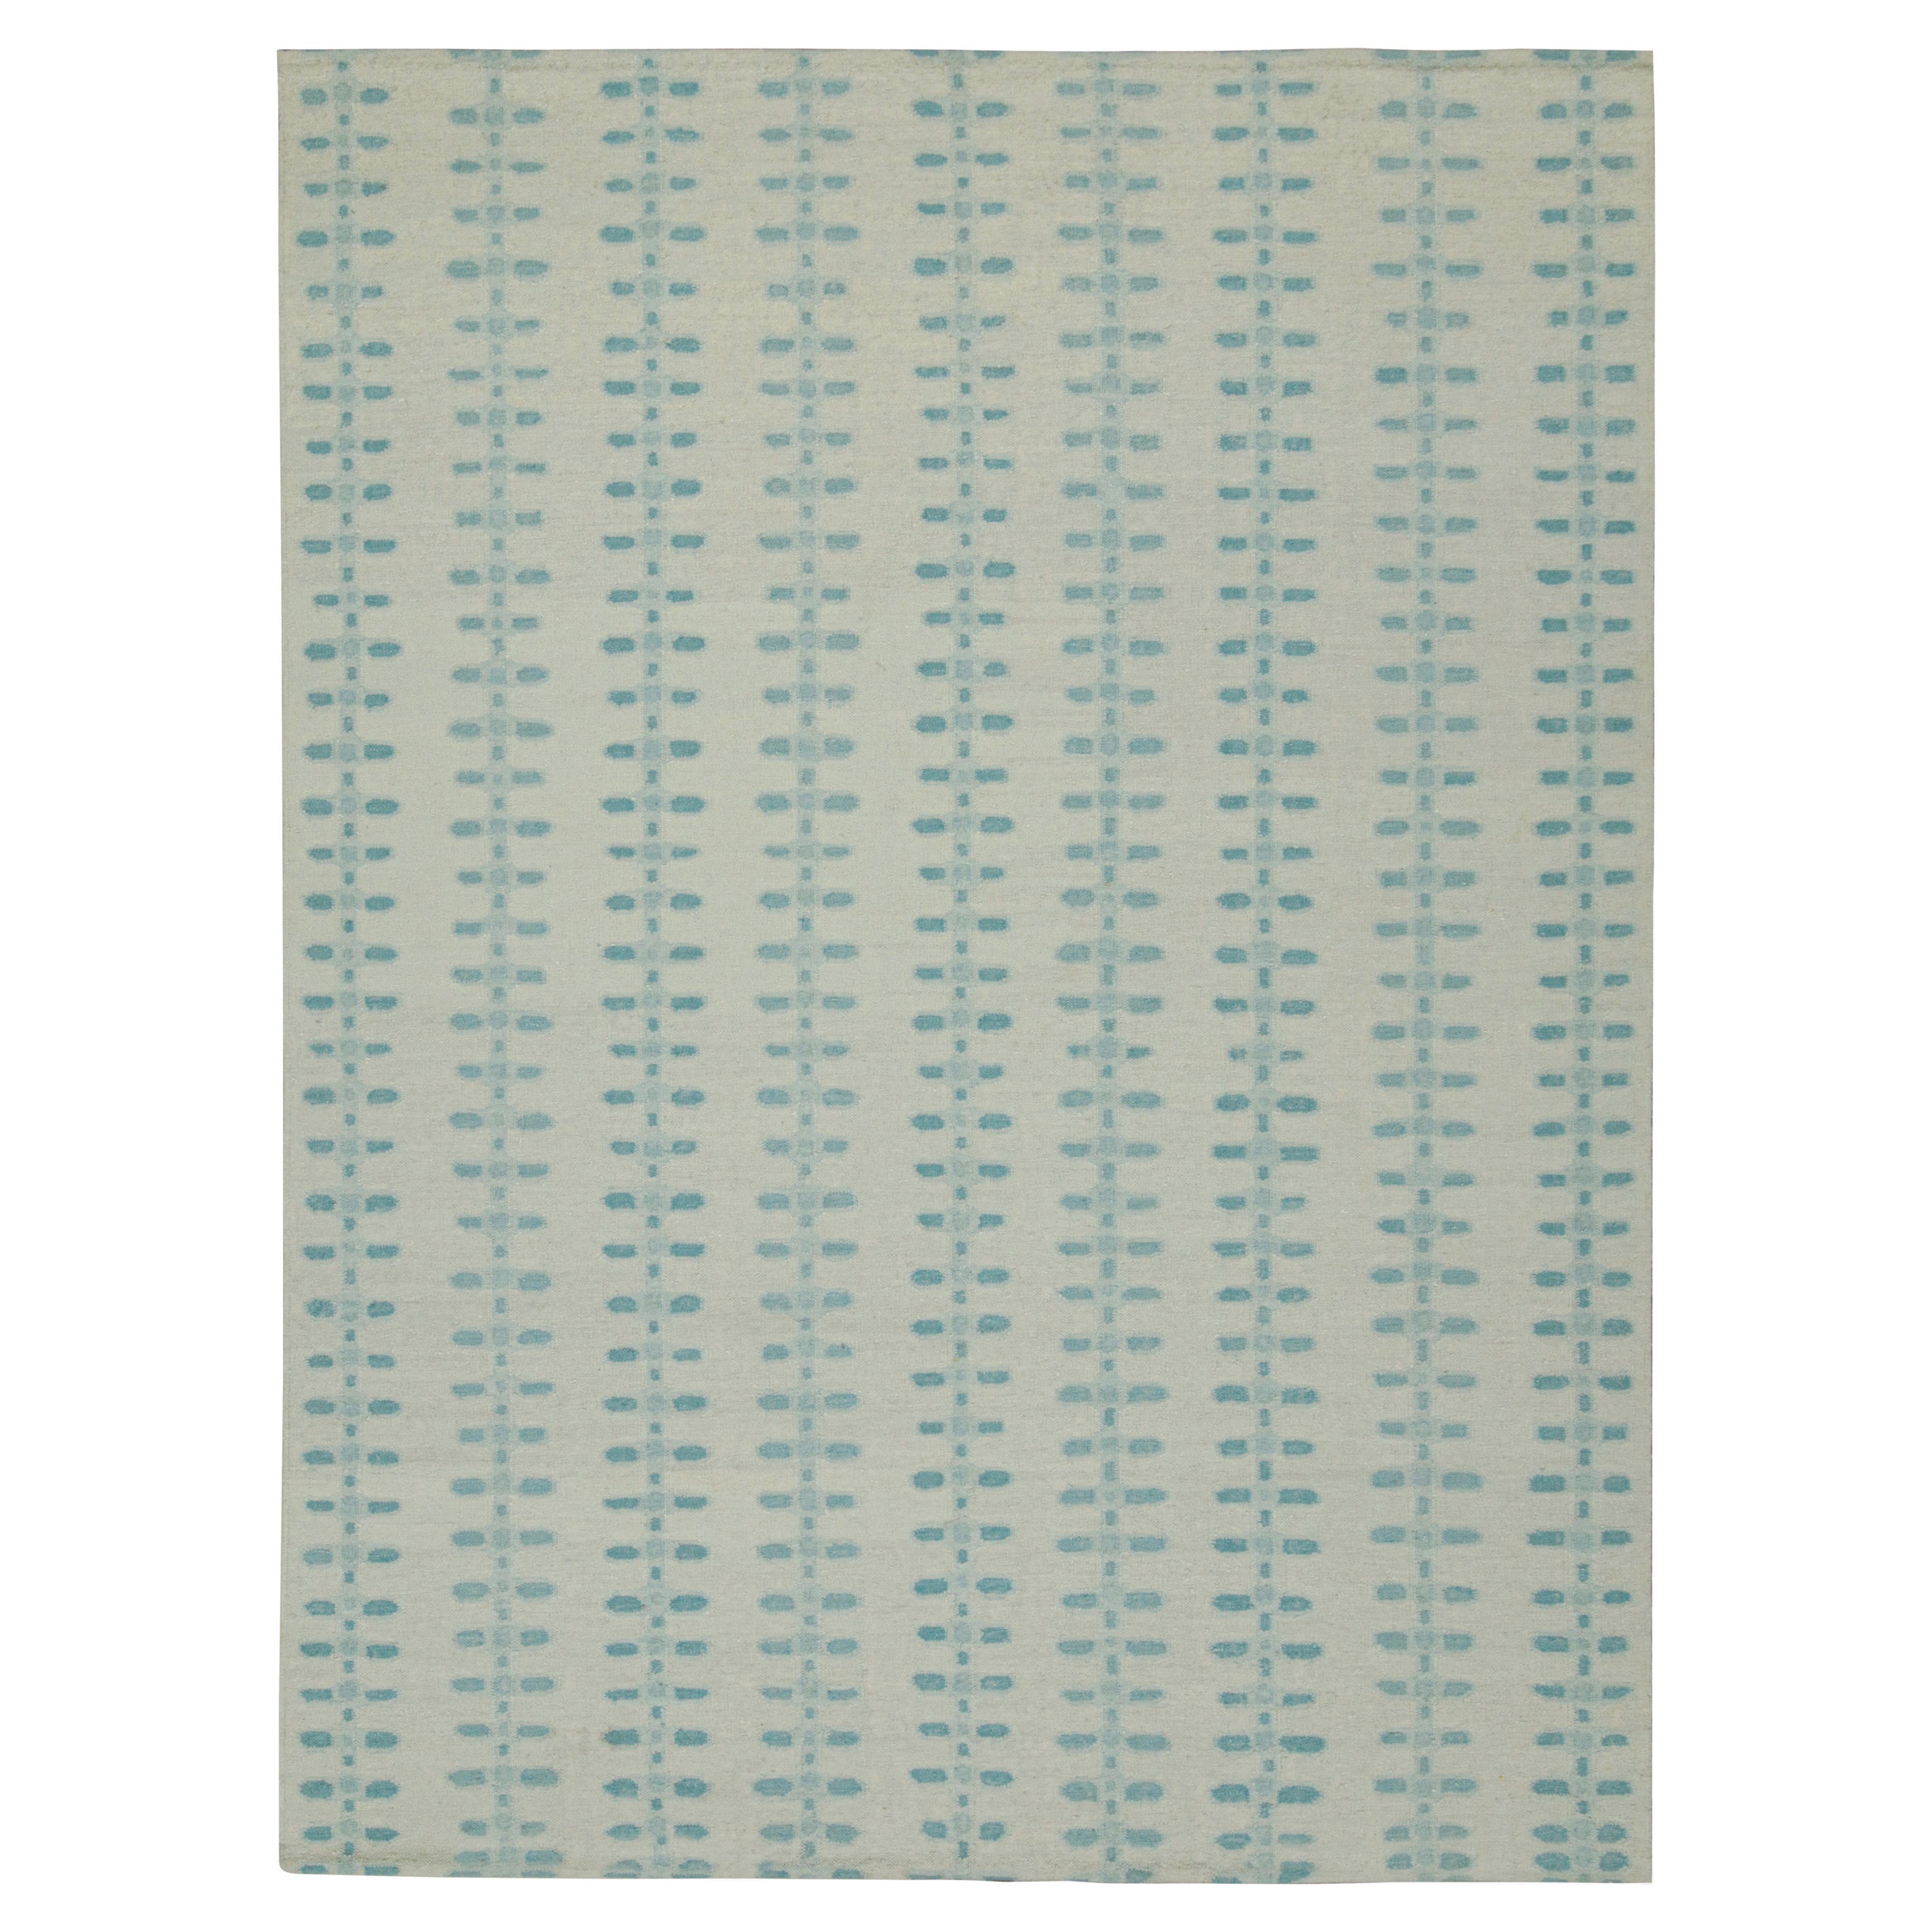 Rug & Kilim’s Scandinavian Style Kilim with Patterns in Tones of Blue & Gray